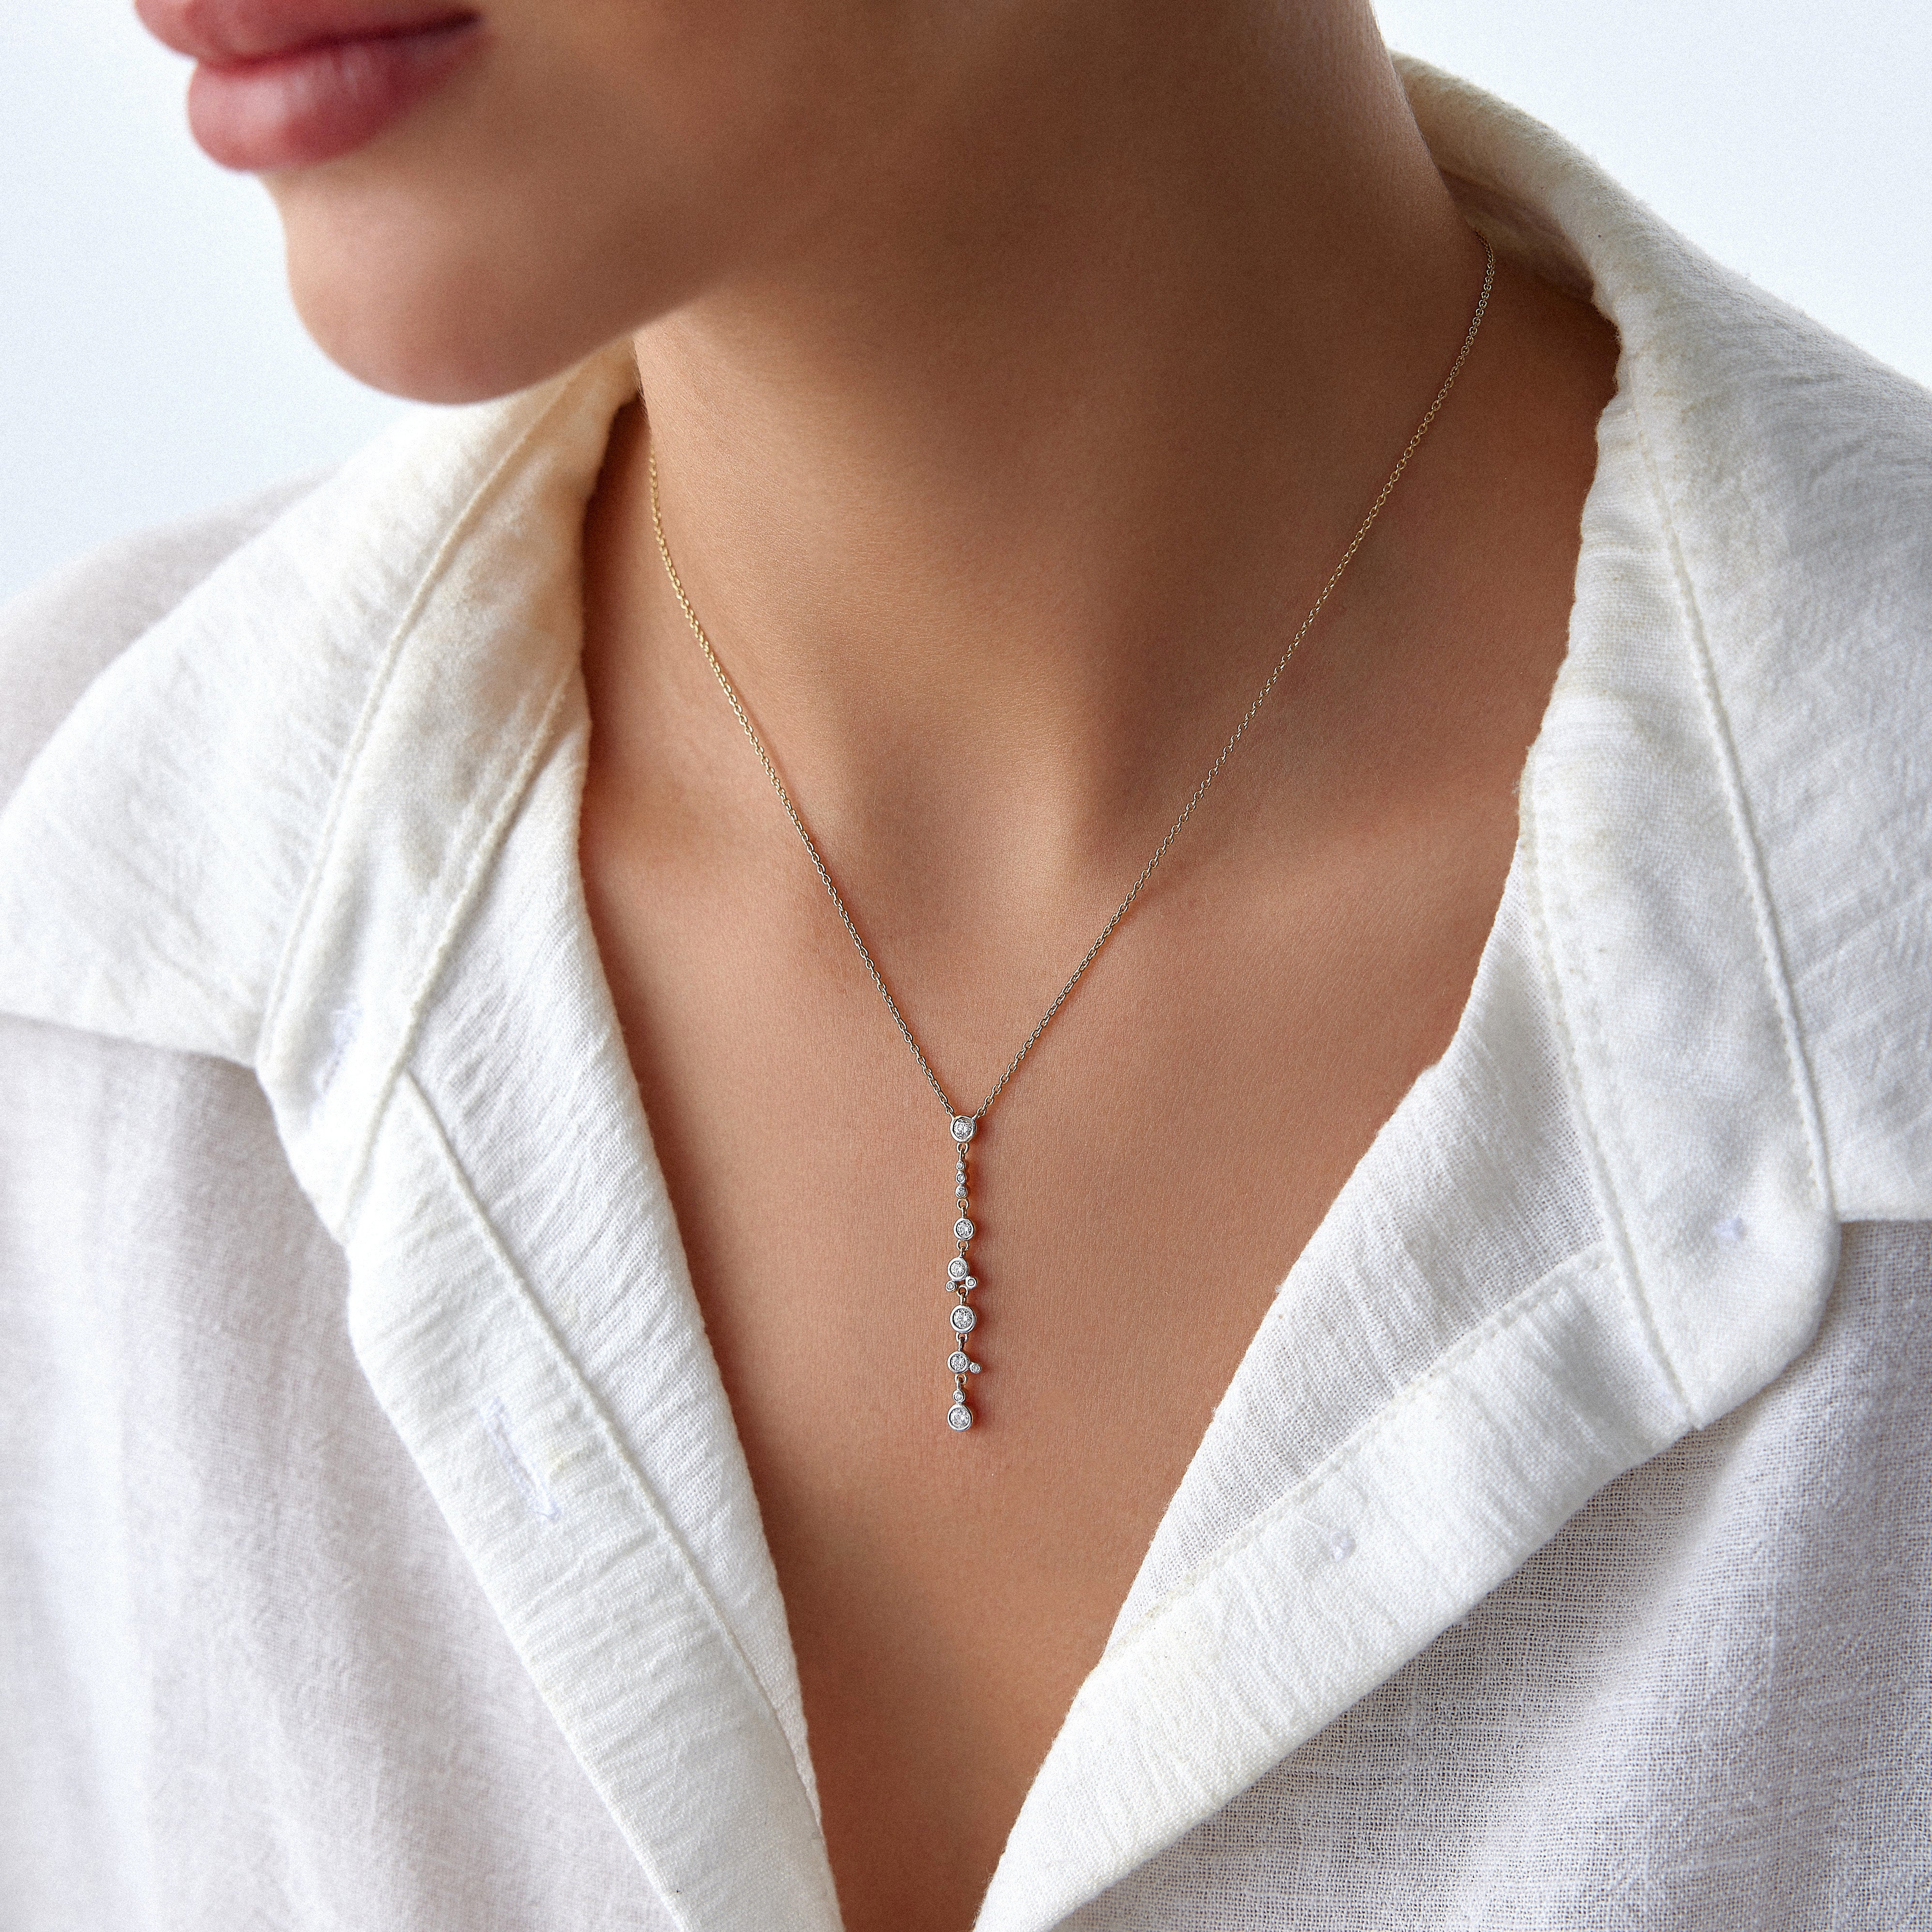 Diamond Lariat Necklace in 14K Gold / WATERFALL